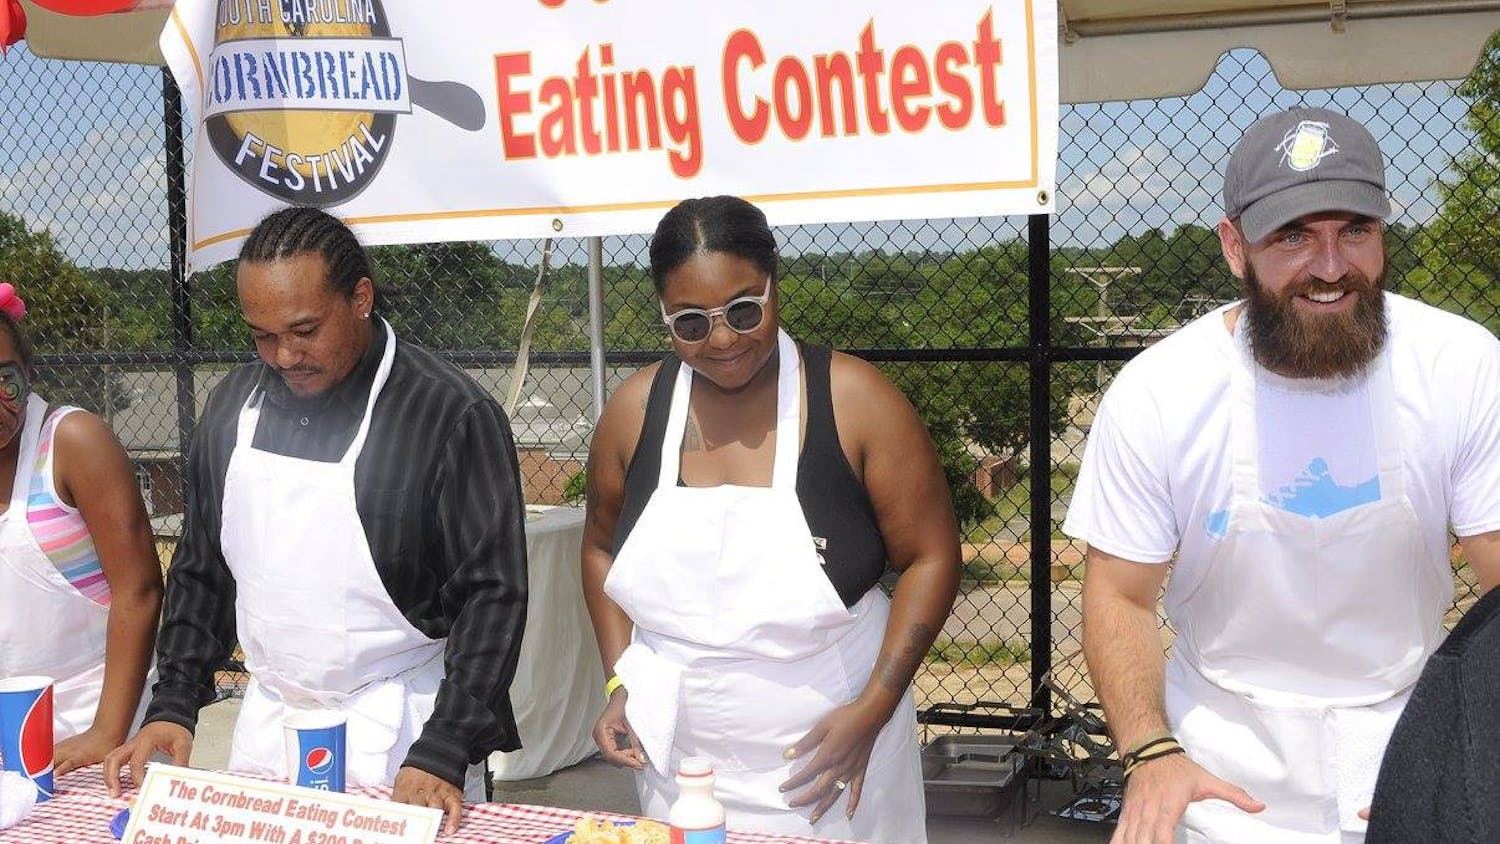 Participants get ready to compete in the South Carolina Cornbread Festival's cornbread eating contest in 2016. This year's festival will be held on Sunday, April 30, from 11 a.m. to 6 p.m.